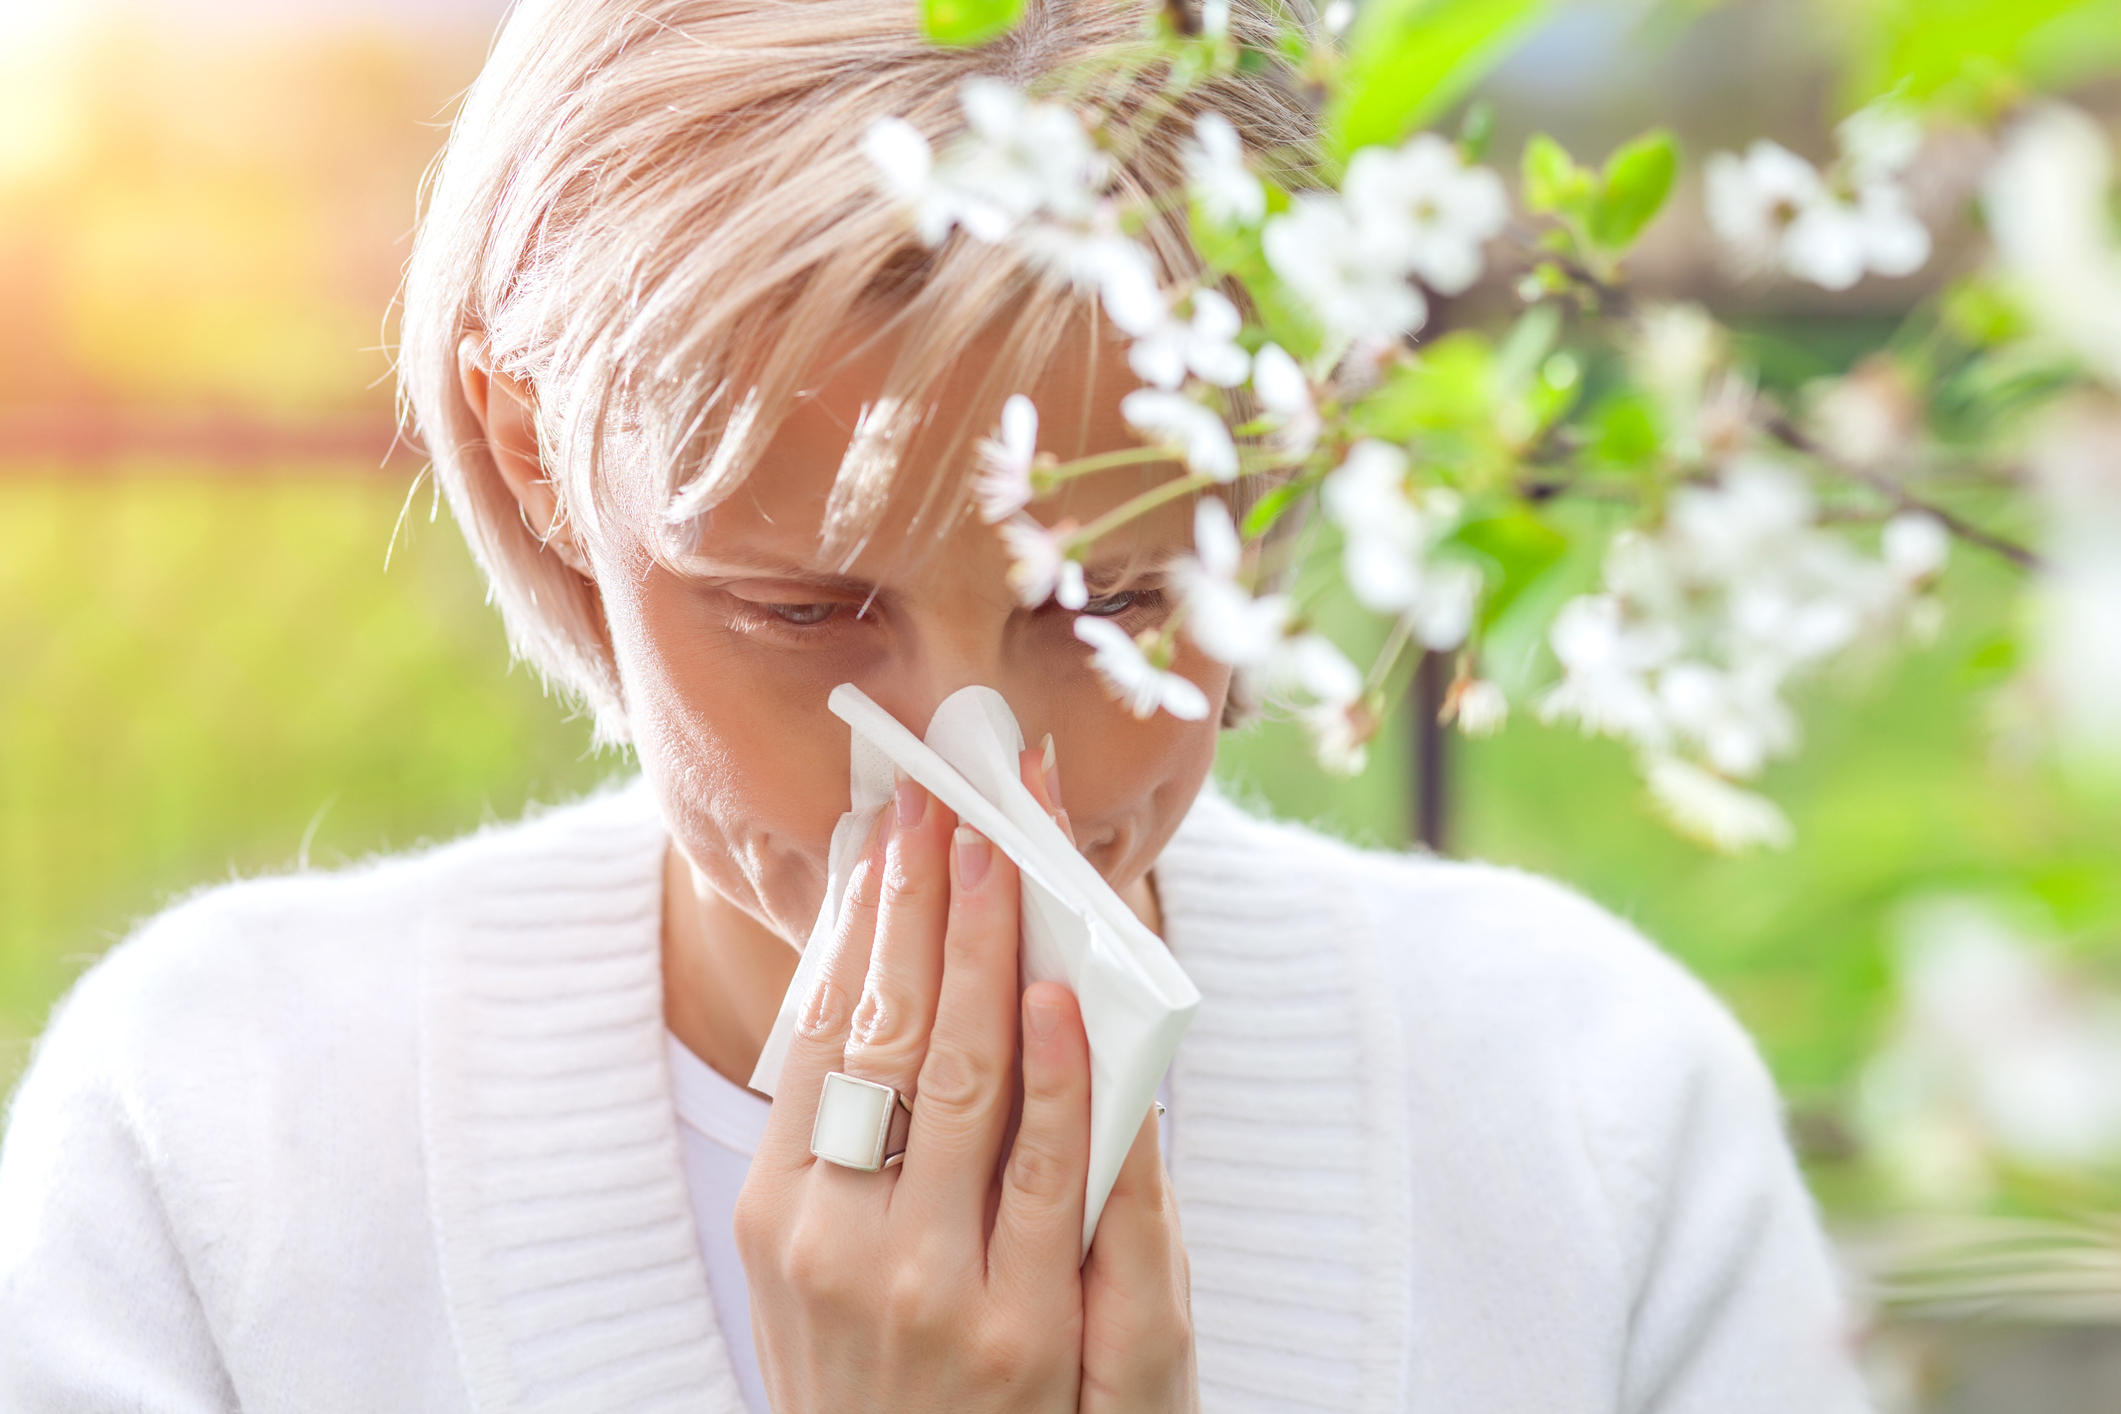 Woman sneezing, standing next to a tree in bloom. (Getty Images)